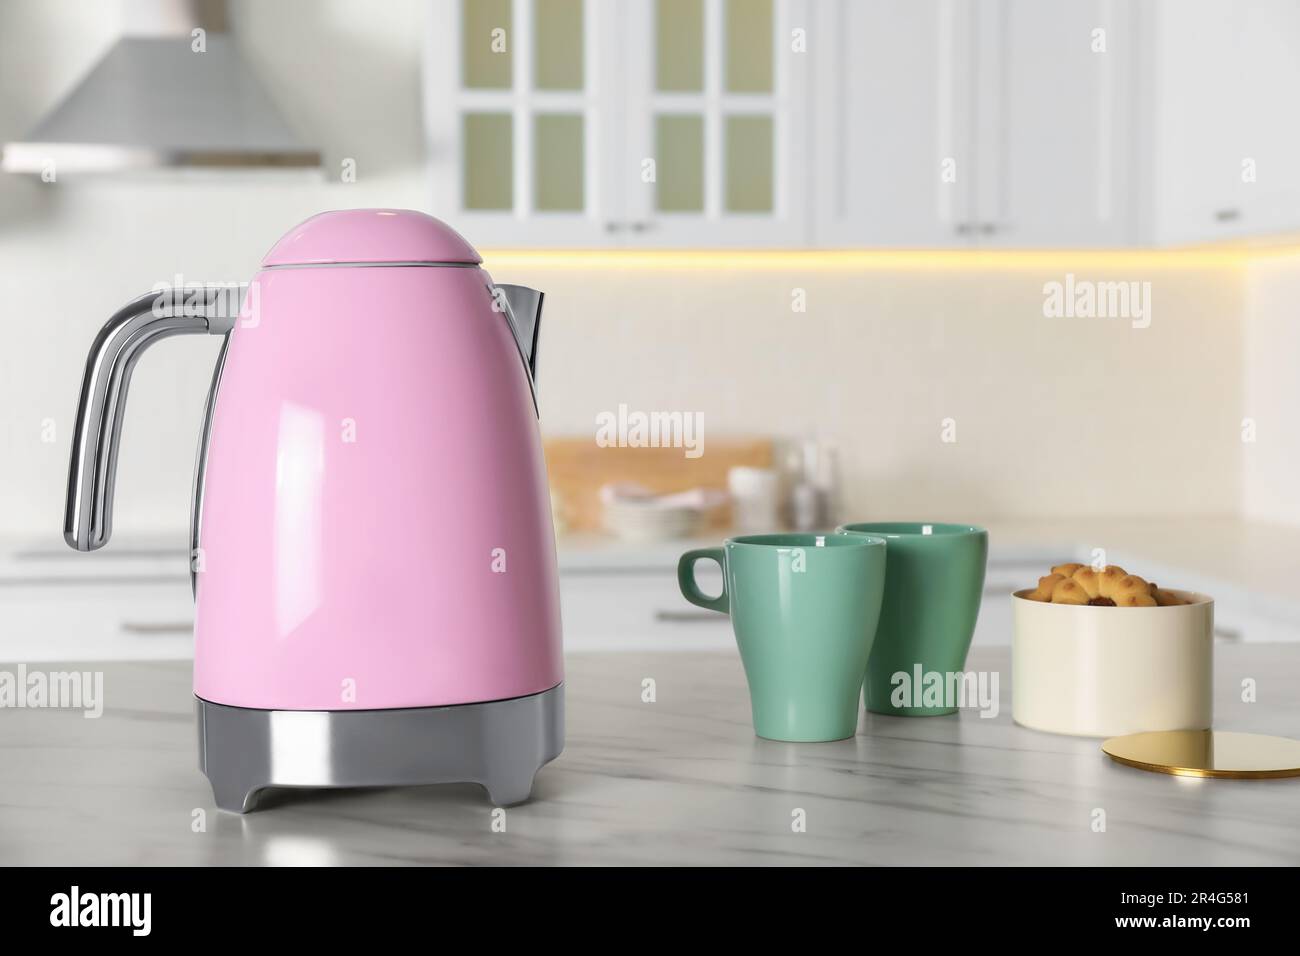 https://c8.alamy.com/comp/2R4G581/modern-electric-kettle-cups-and-cookies-on-table-in-kitchen-2R4G581.jpg